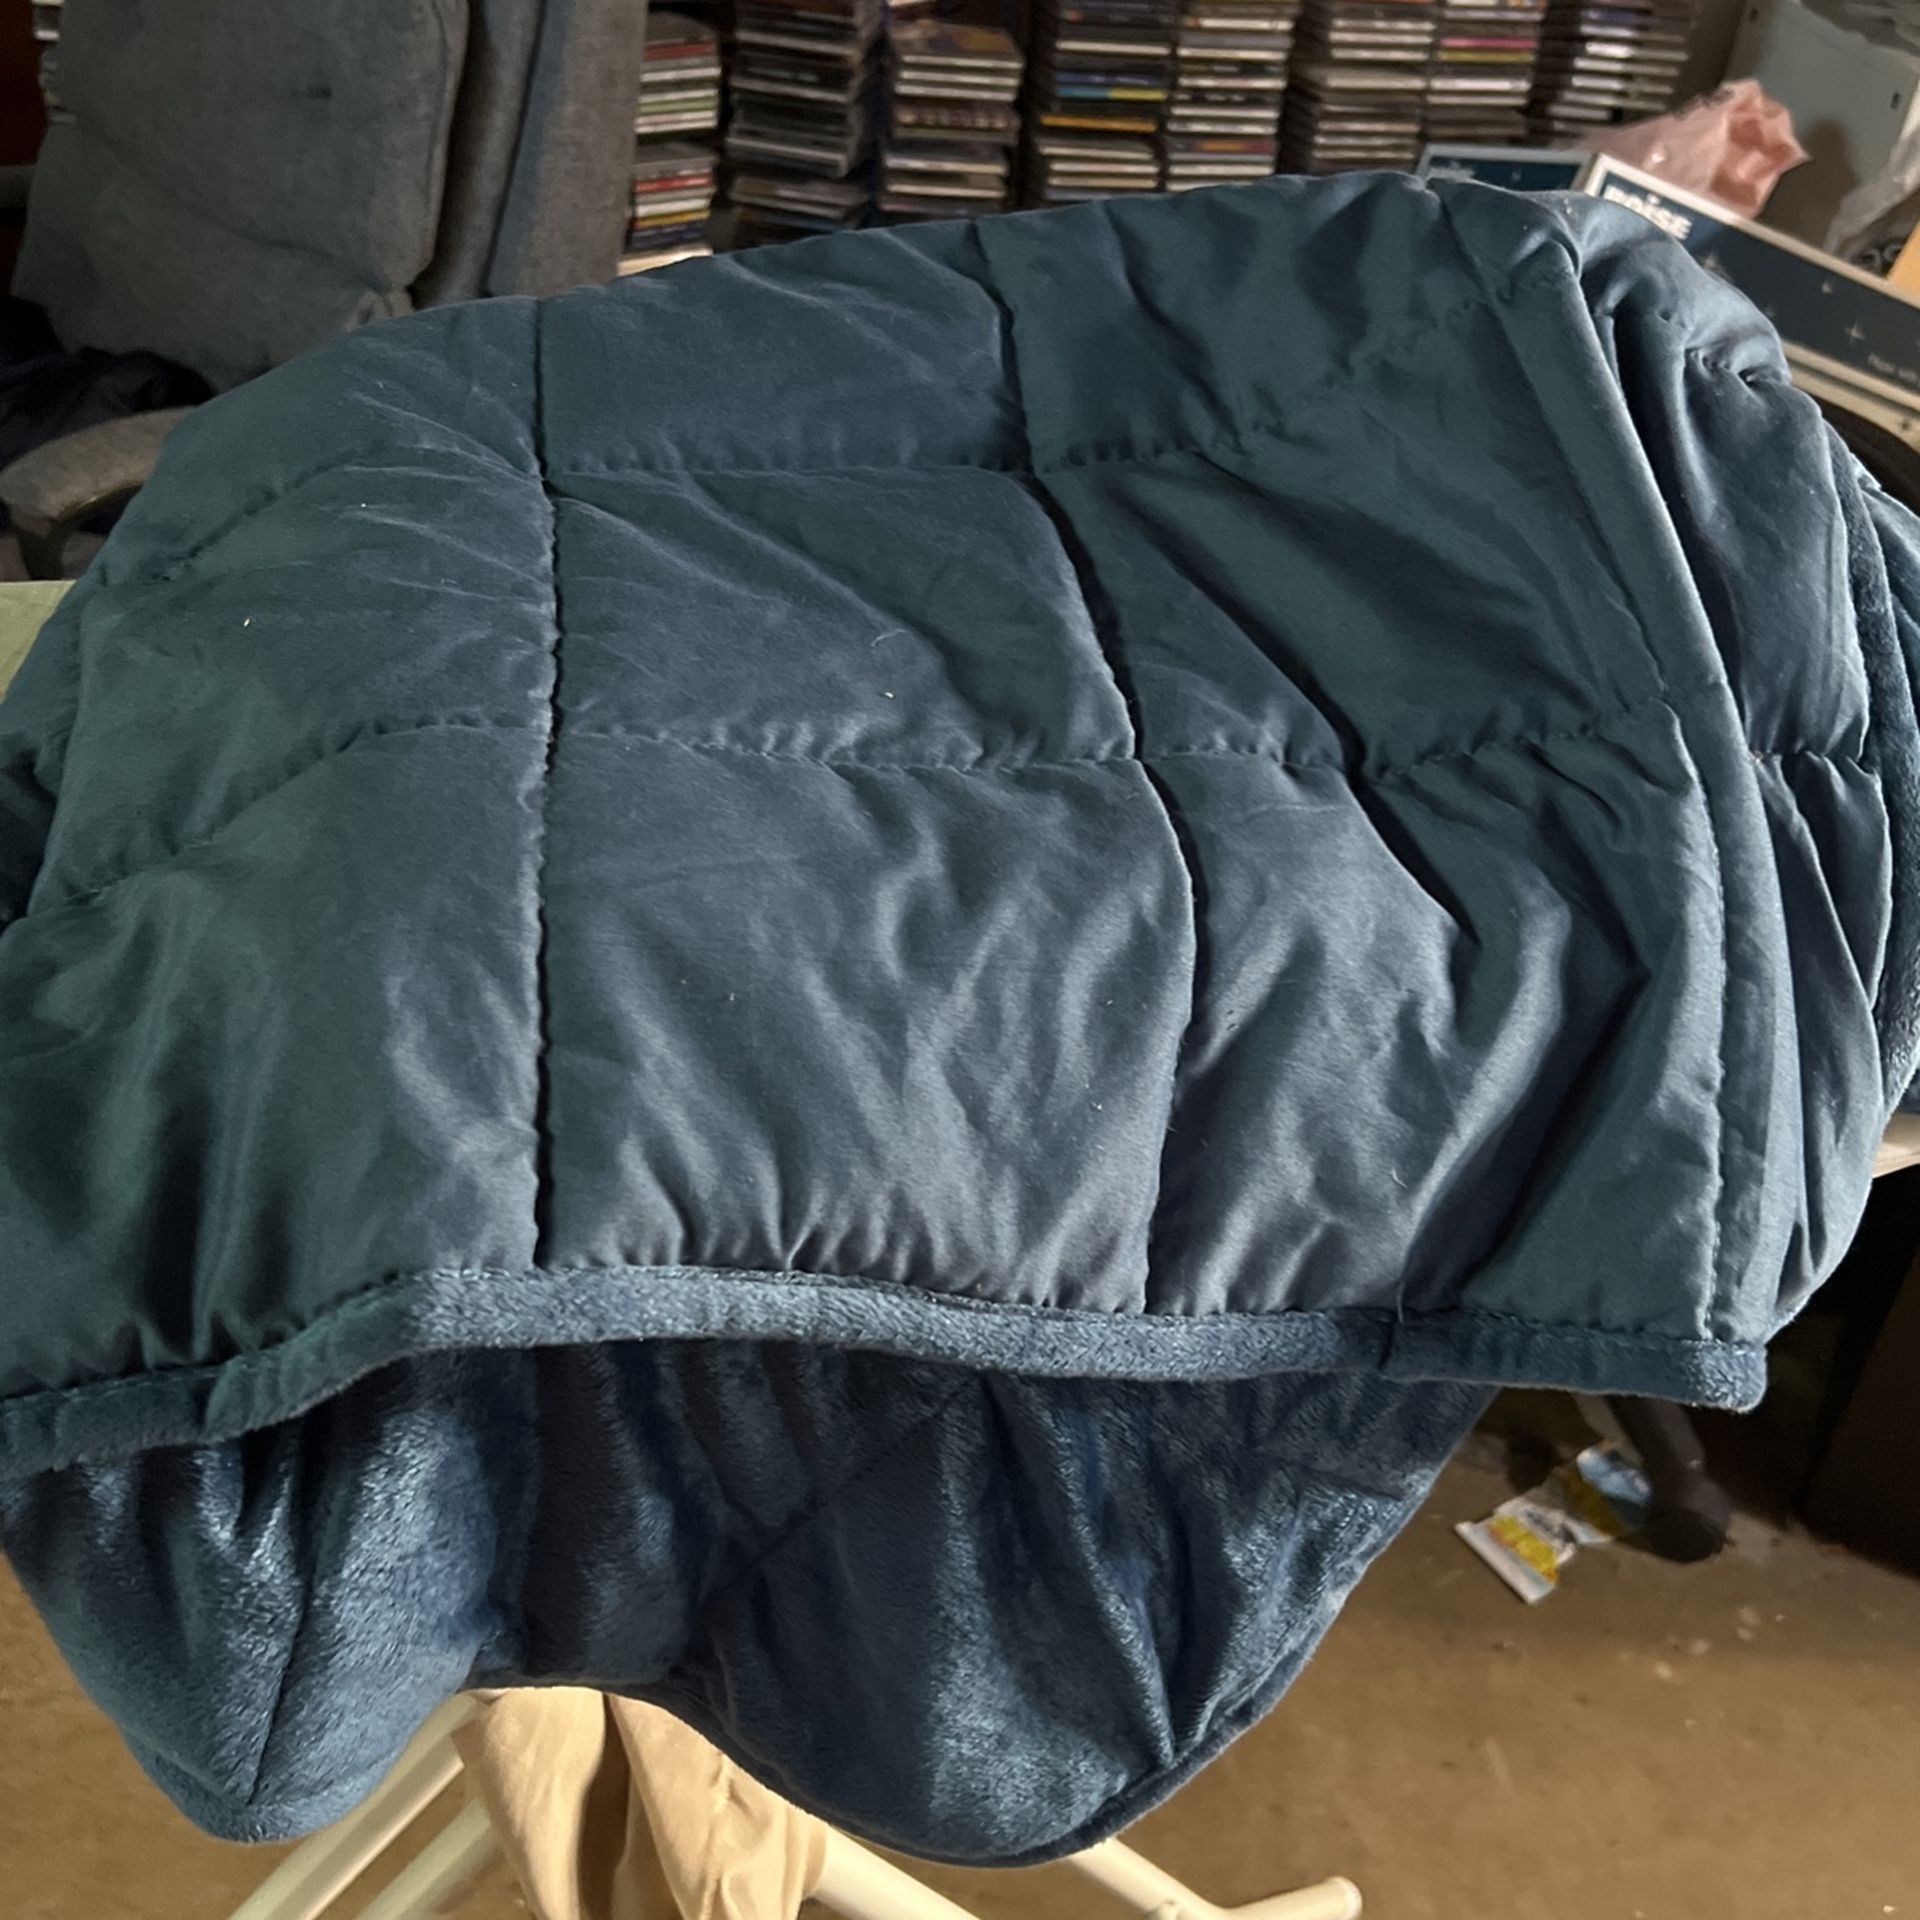 48x 72 Mint Condition Weighted Blanket 